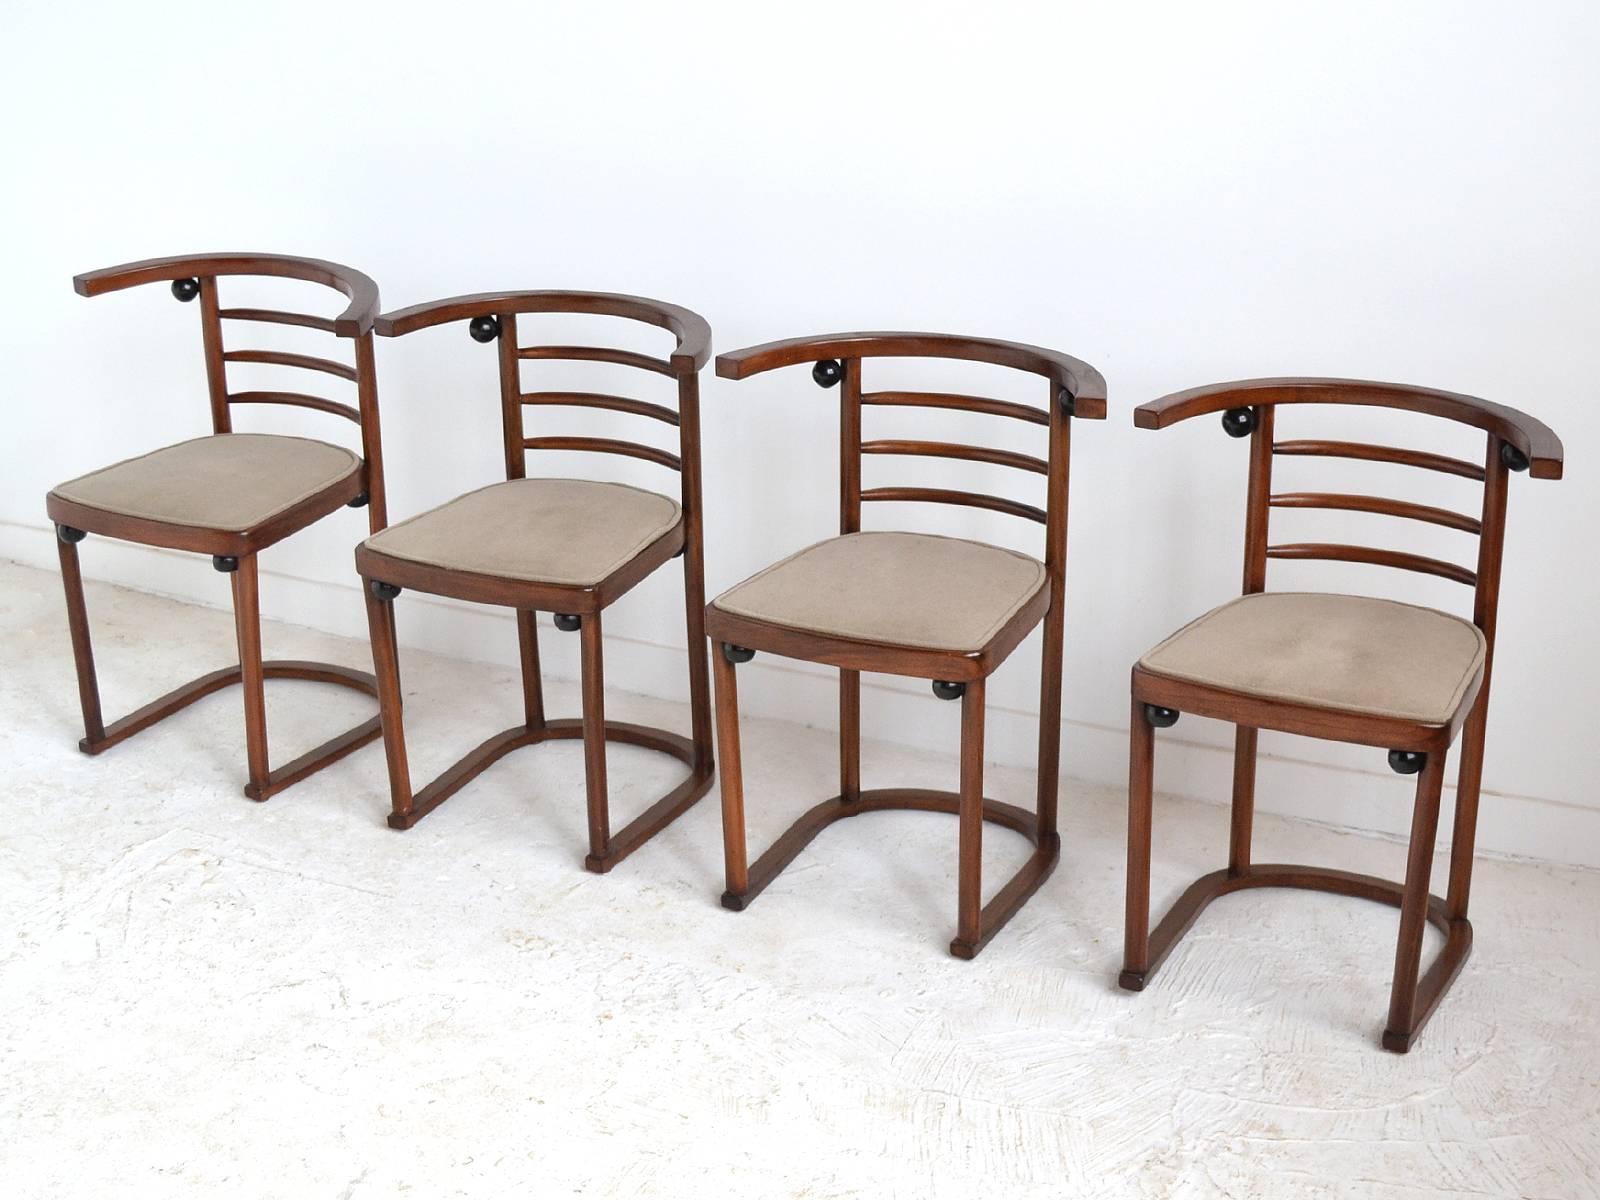 Stained Joseph Hoffman Fledermaus Chairs by Thonet